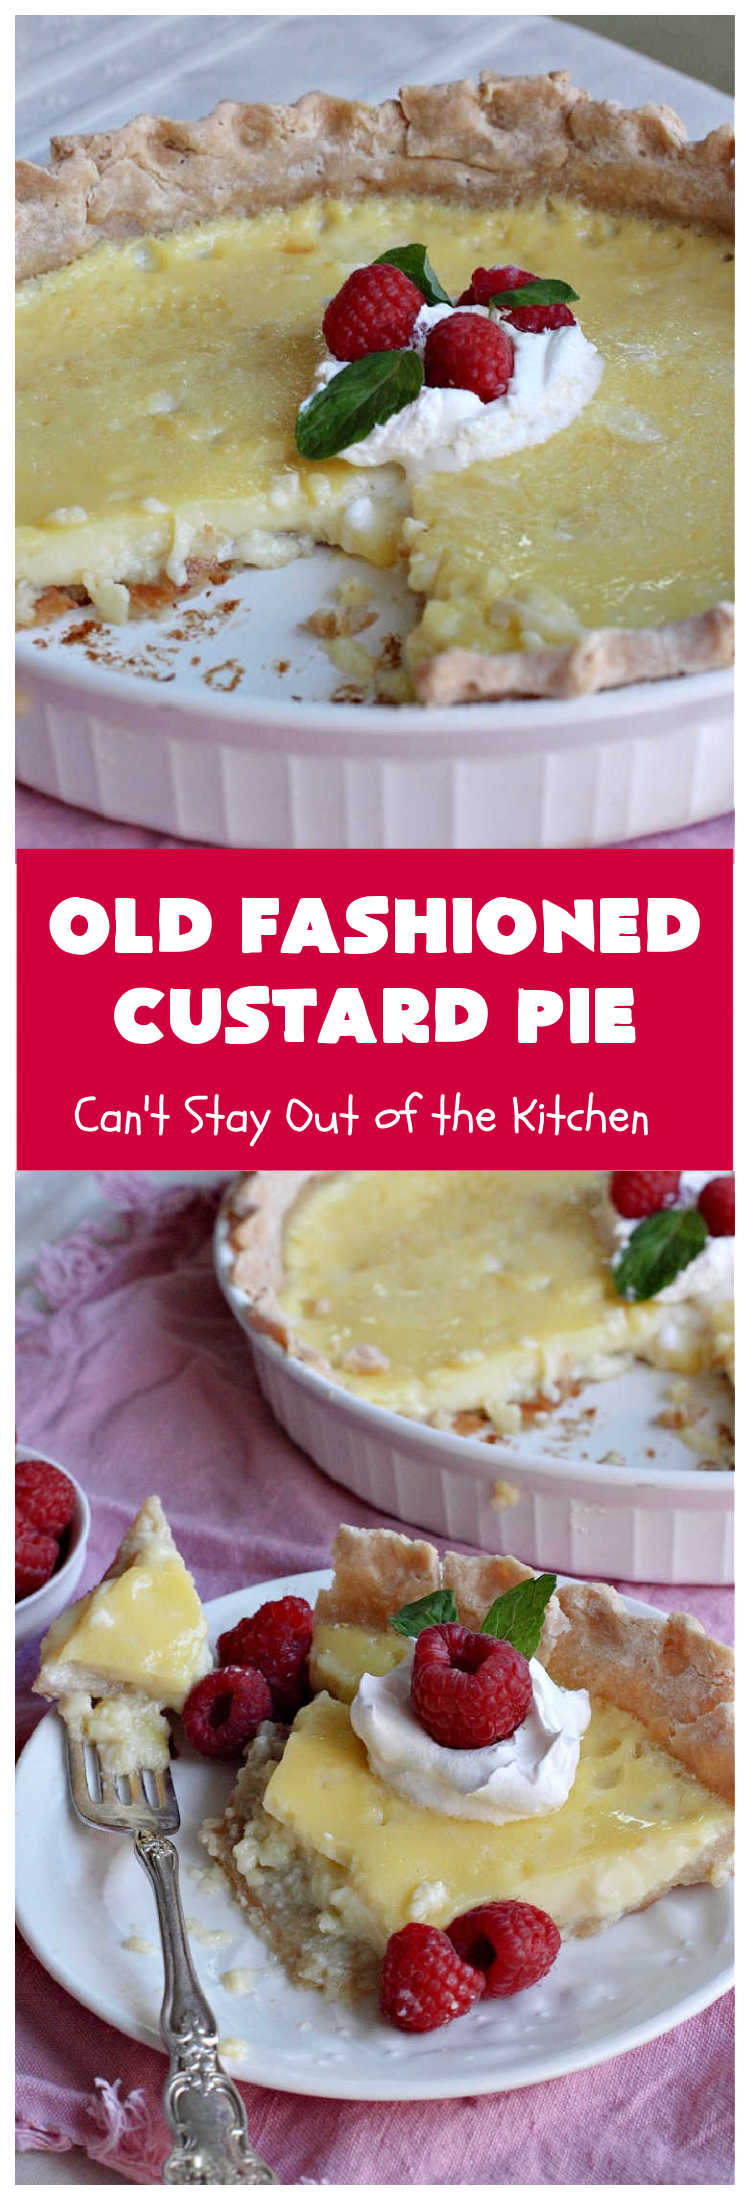 Old Fashioned Custard Pie | Can't Stay Out of the Kitchen | this delicious #pie is so mouthwatering yet easy to make. It makes a great #dessert especially when you need one whipped up in a jiffy. It's always been one of my kid's favorite pie recipes because it's not overly sweet. #CustardPie #MomsCustardPie #OldFashionedCustardPie #EasyCustardPie